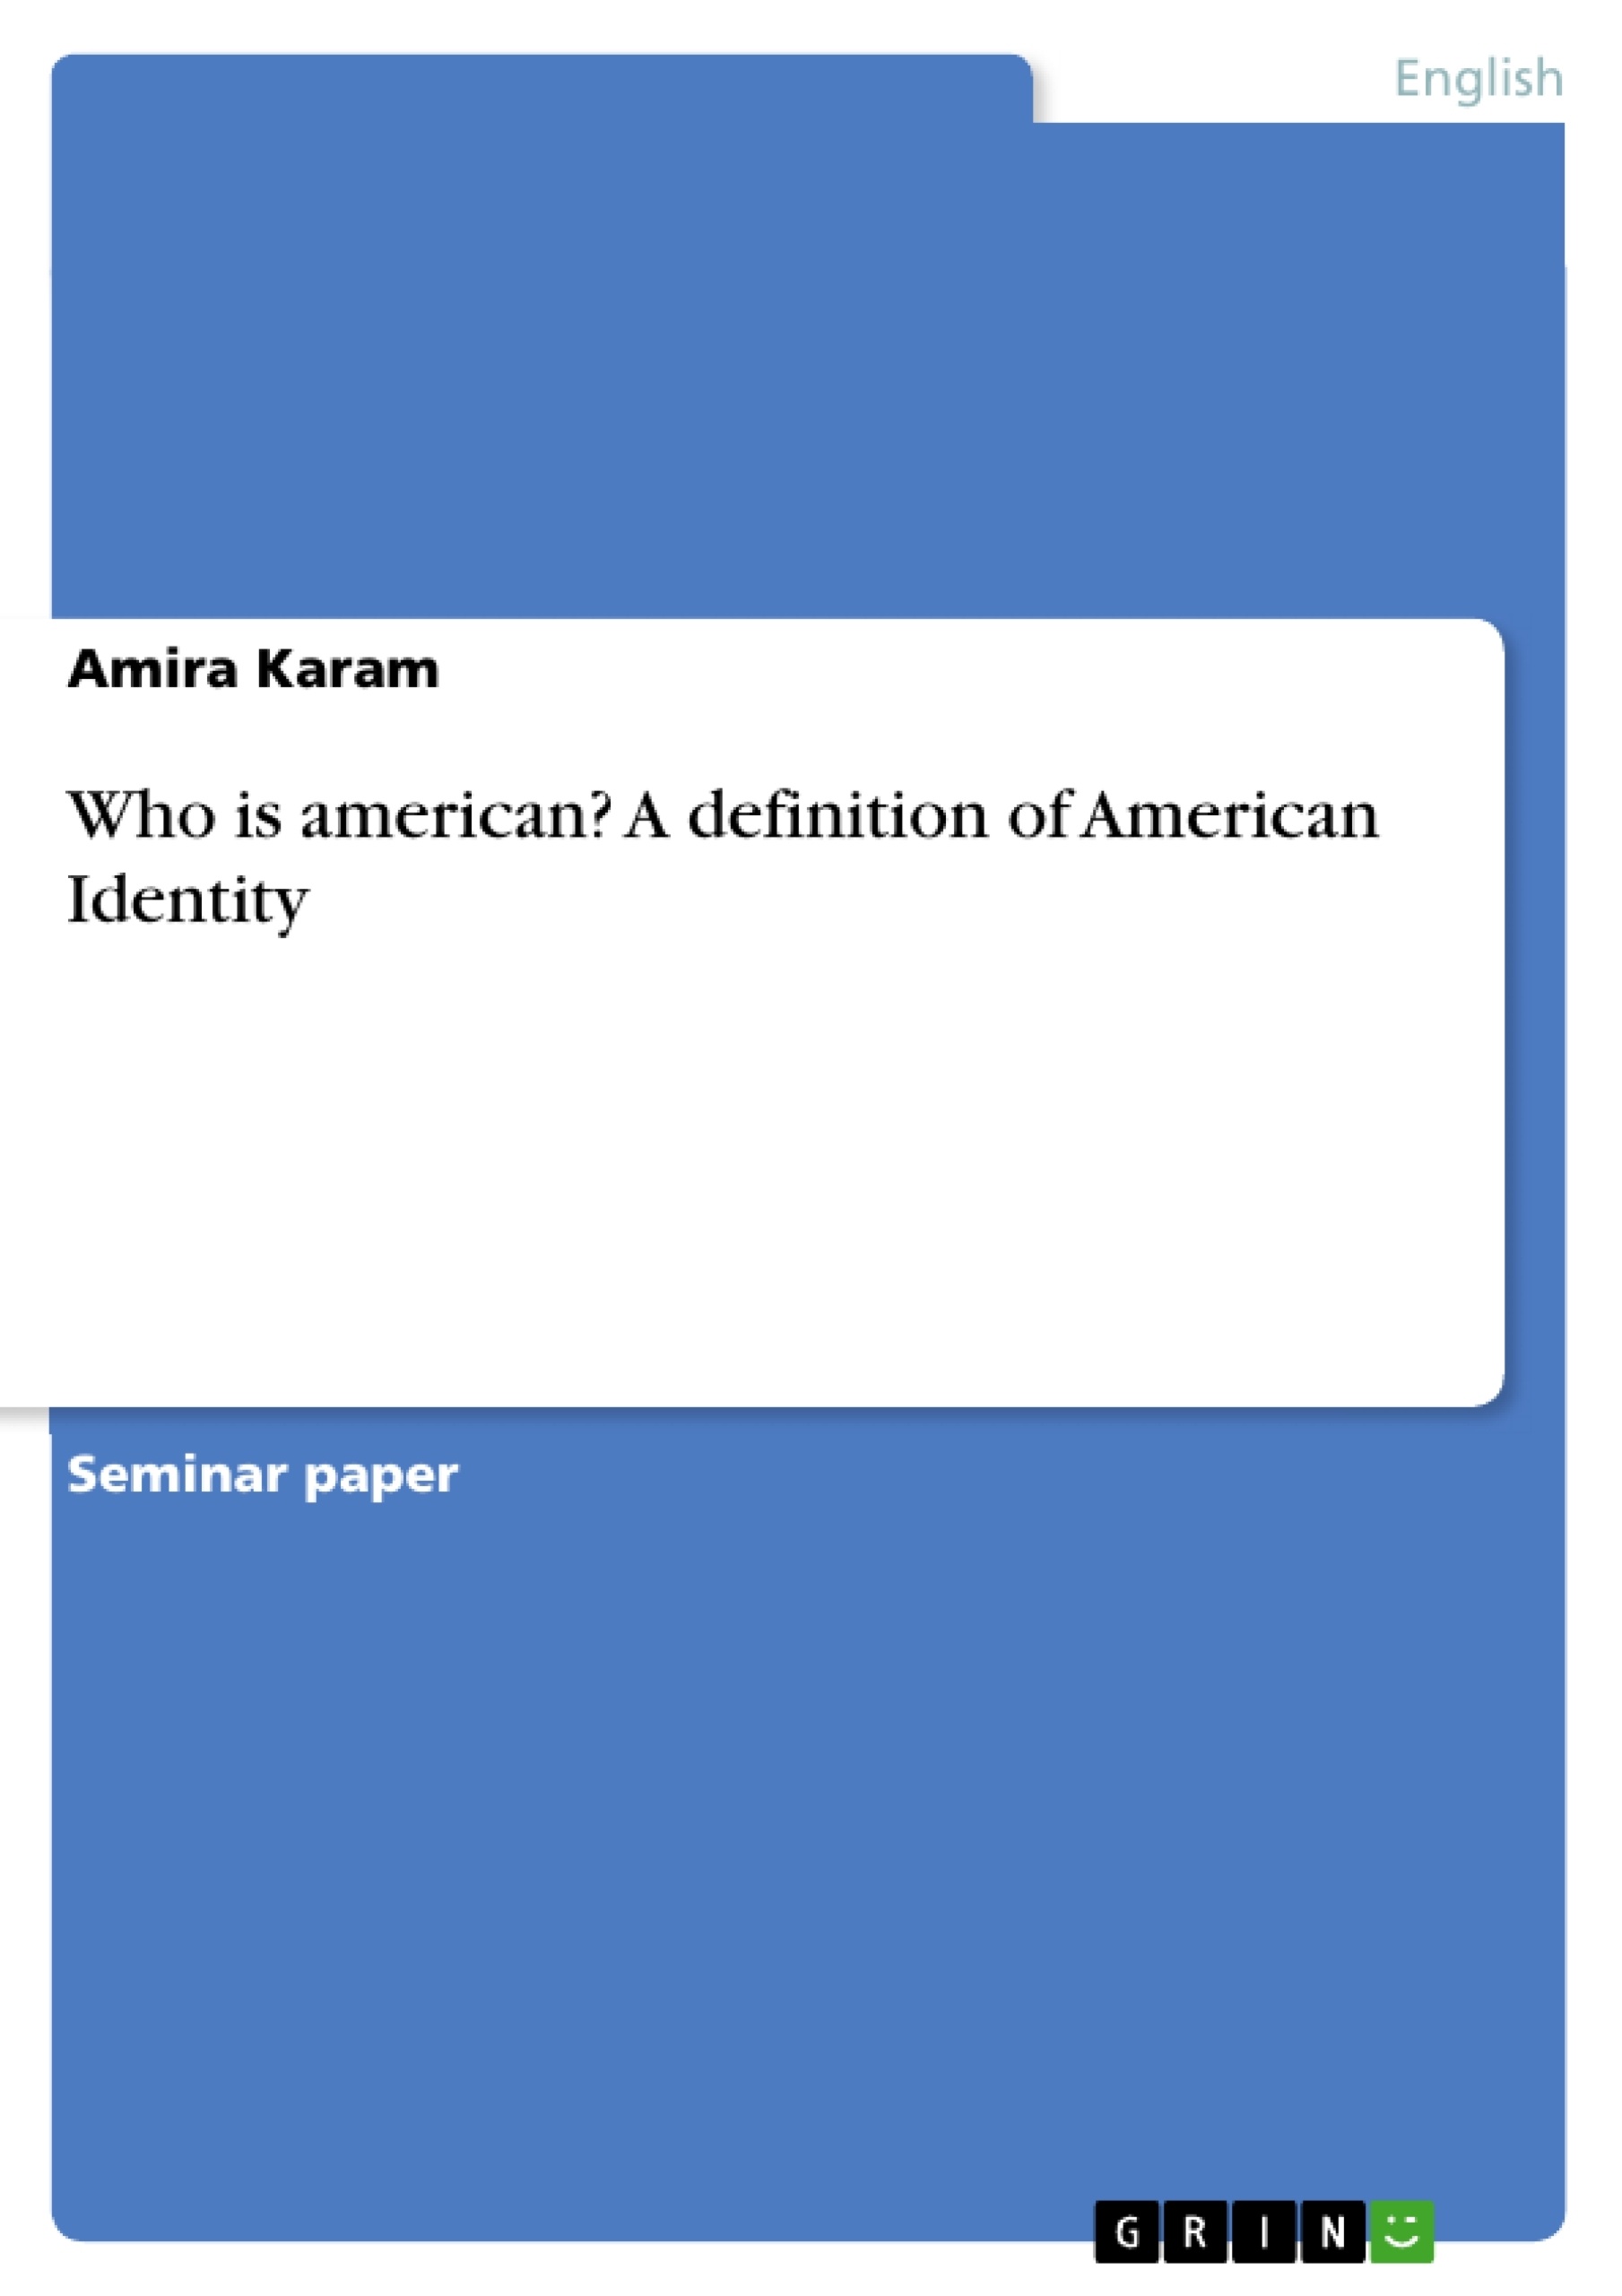 PAPER definition in American English